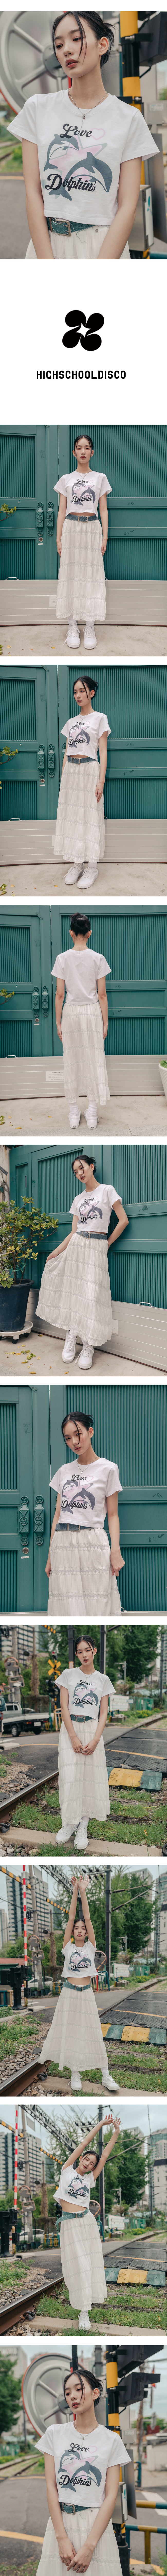 Lovely Dolphin Graphic Crop T-shirt White